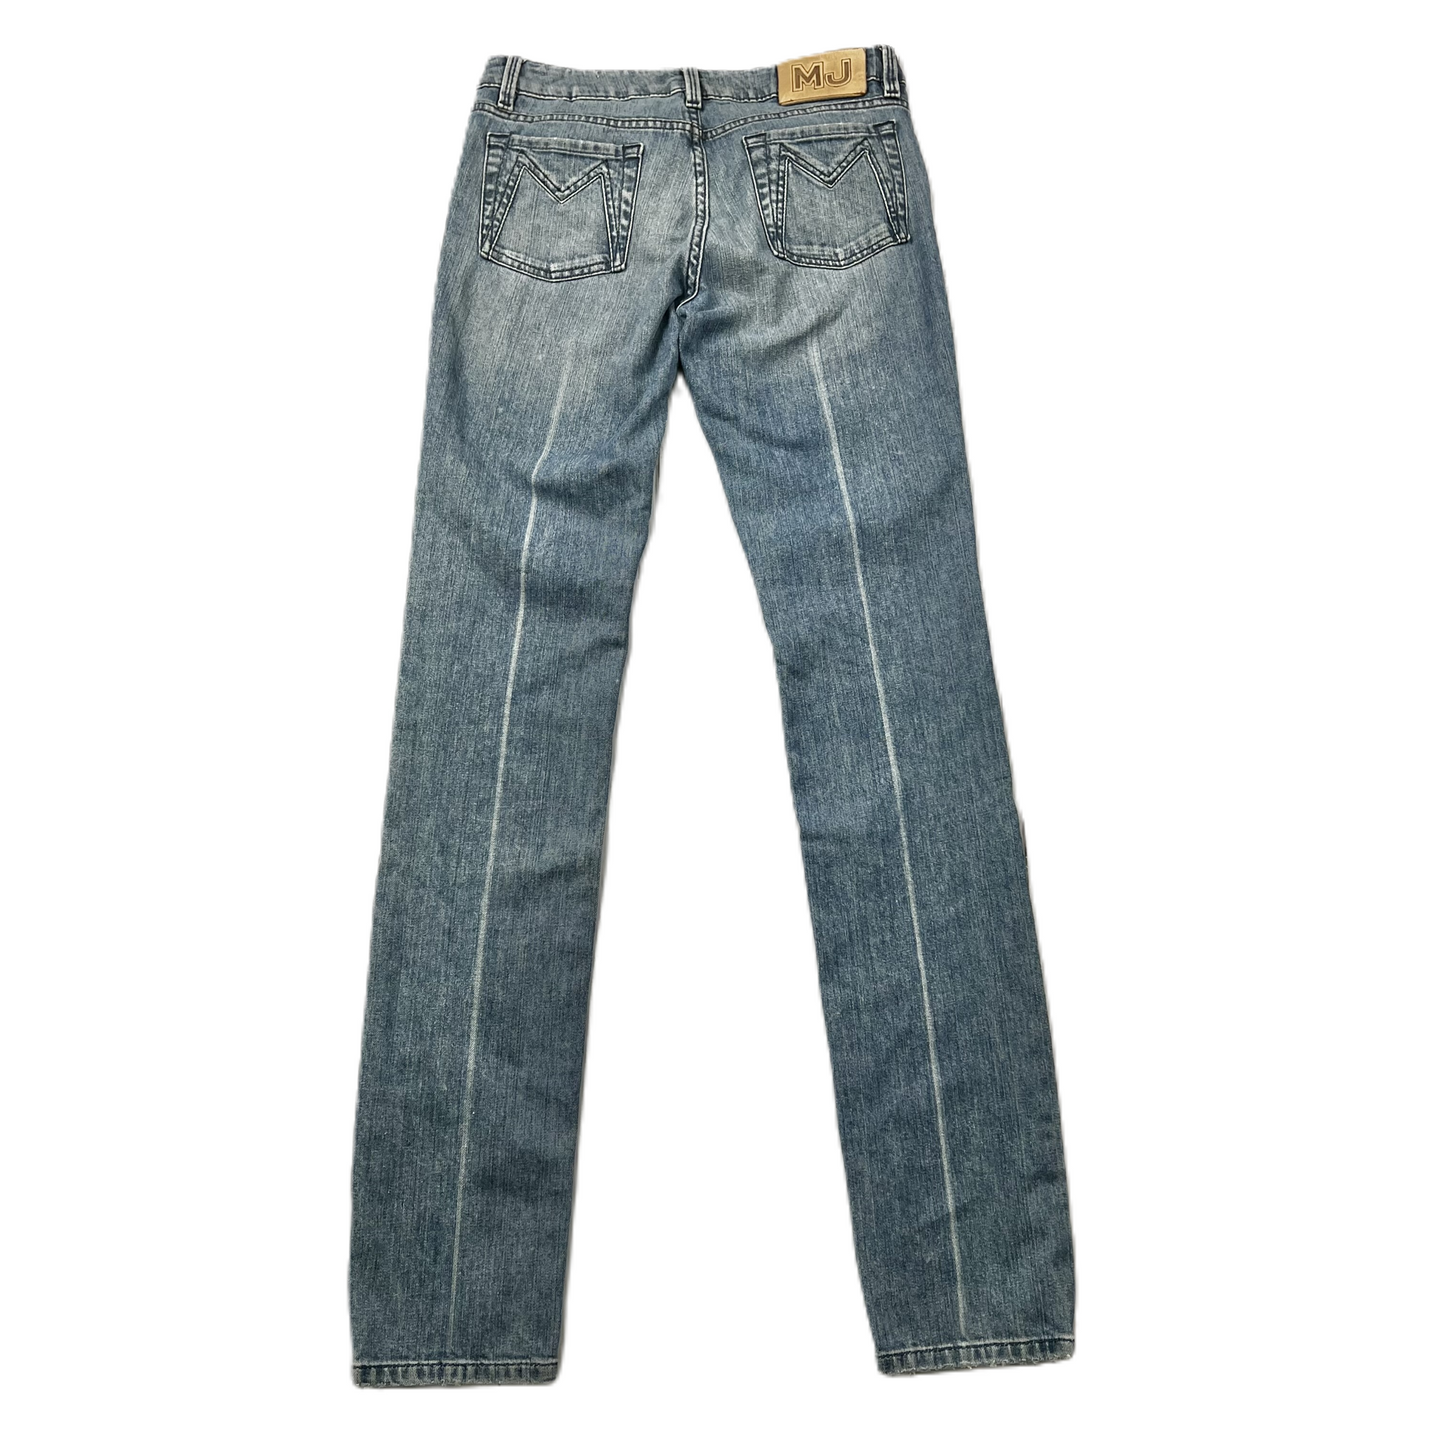 Blue Denim Jeans Straight By Marc By Marc Jacobs, Size: 6